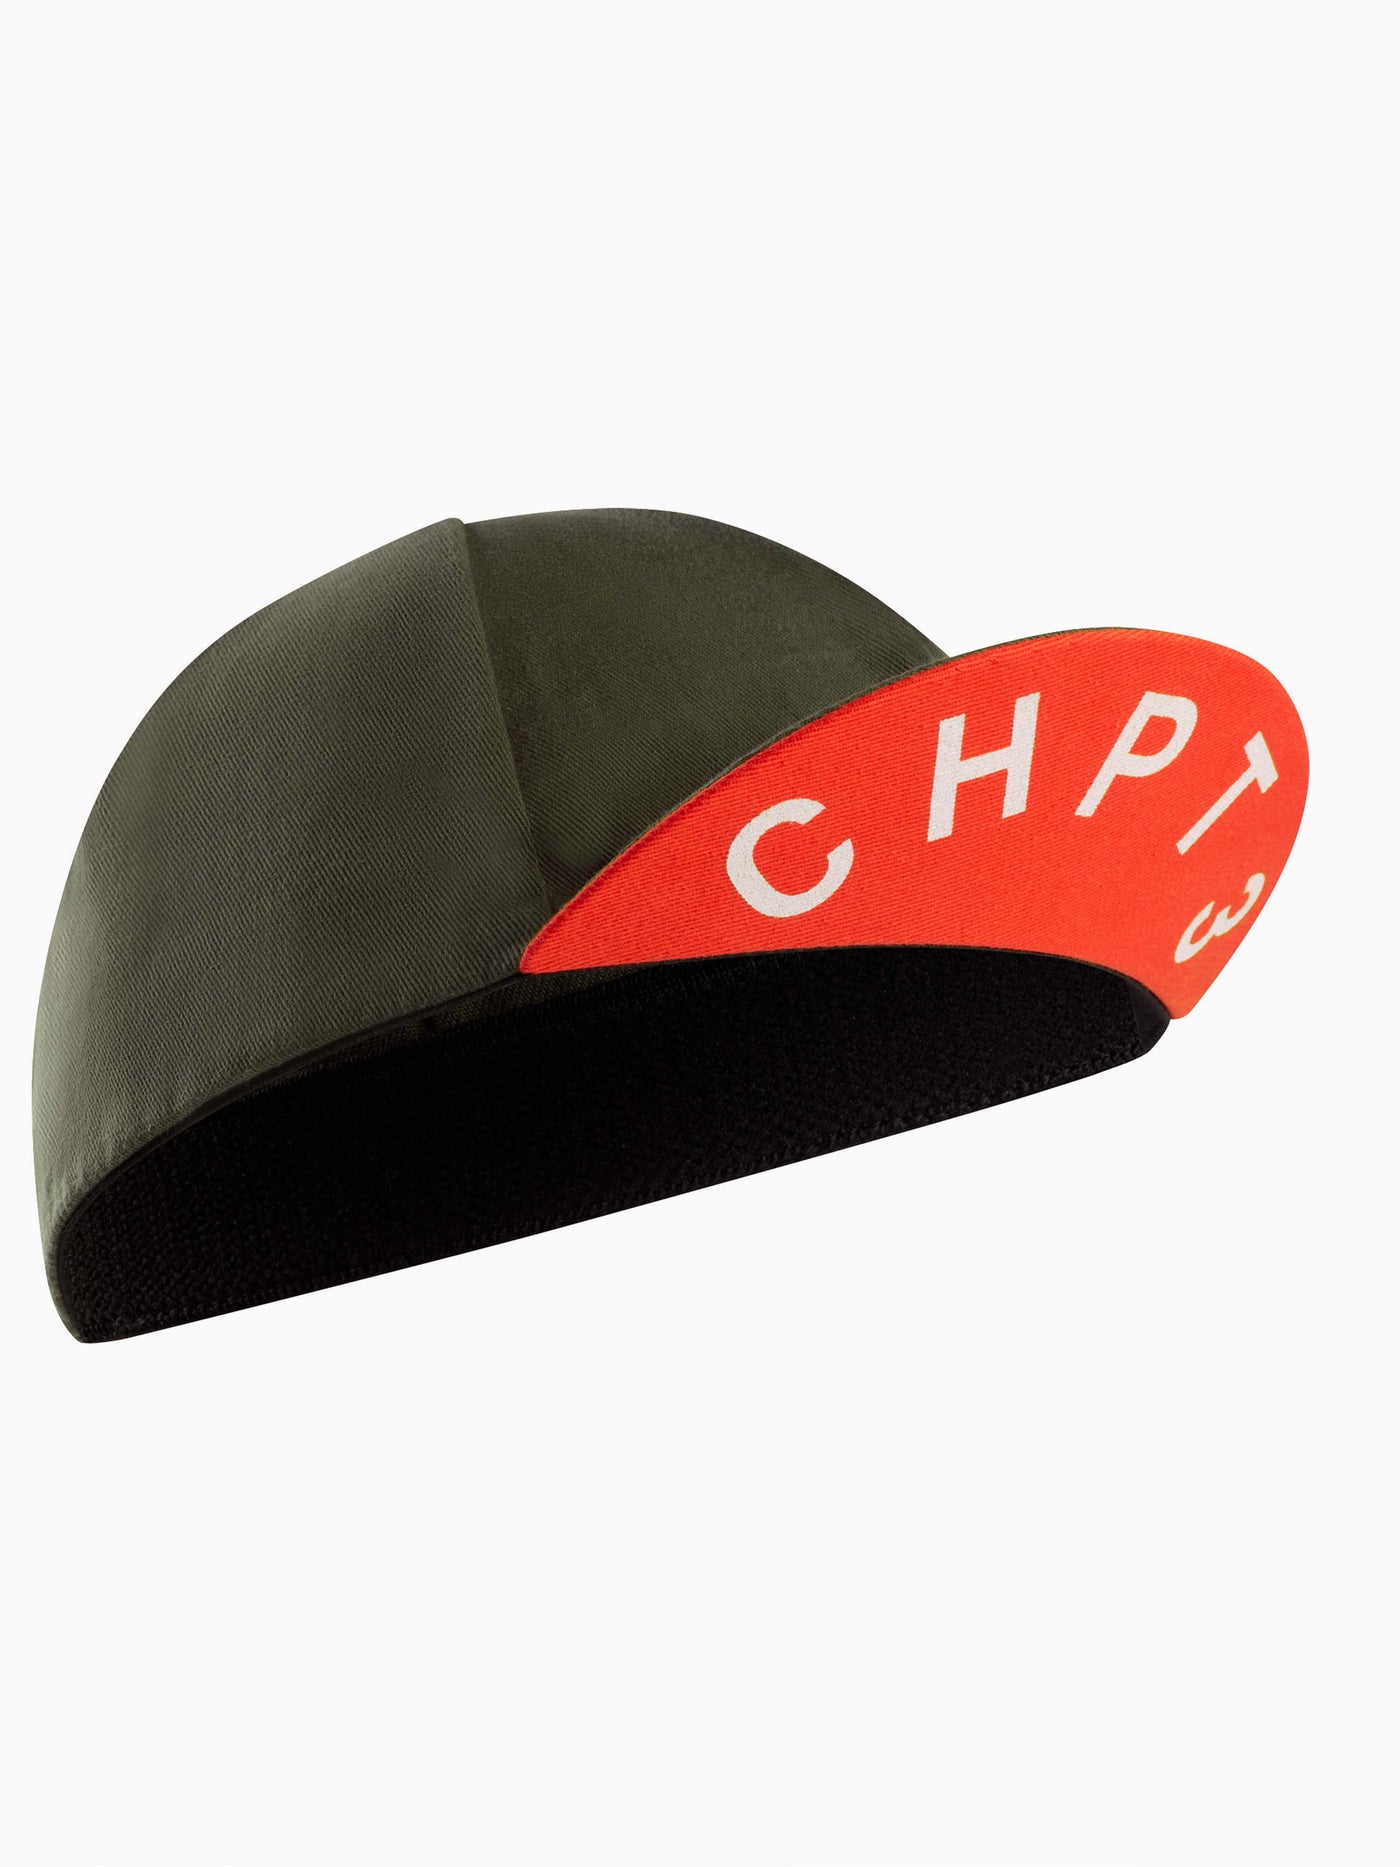 CHPT3 cotton cycling cap in Forest Green with peak showing in Fire red #color_forest-green